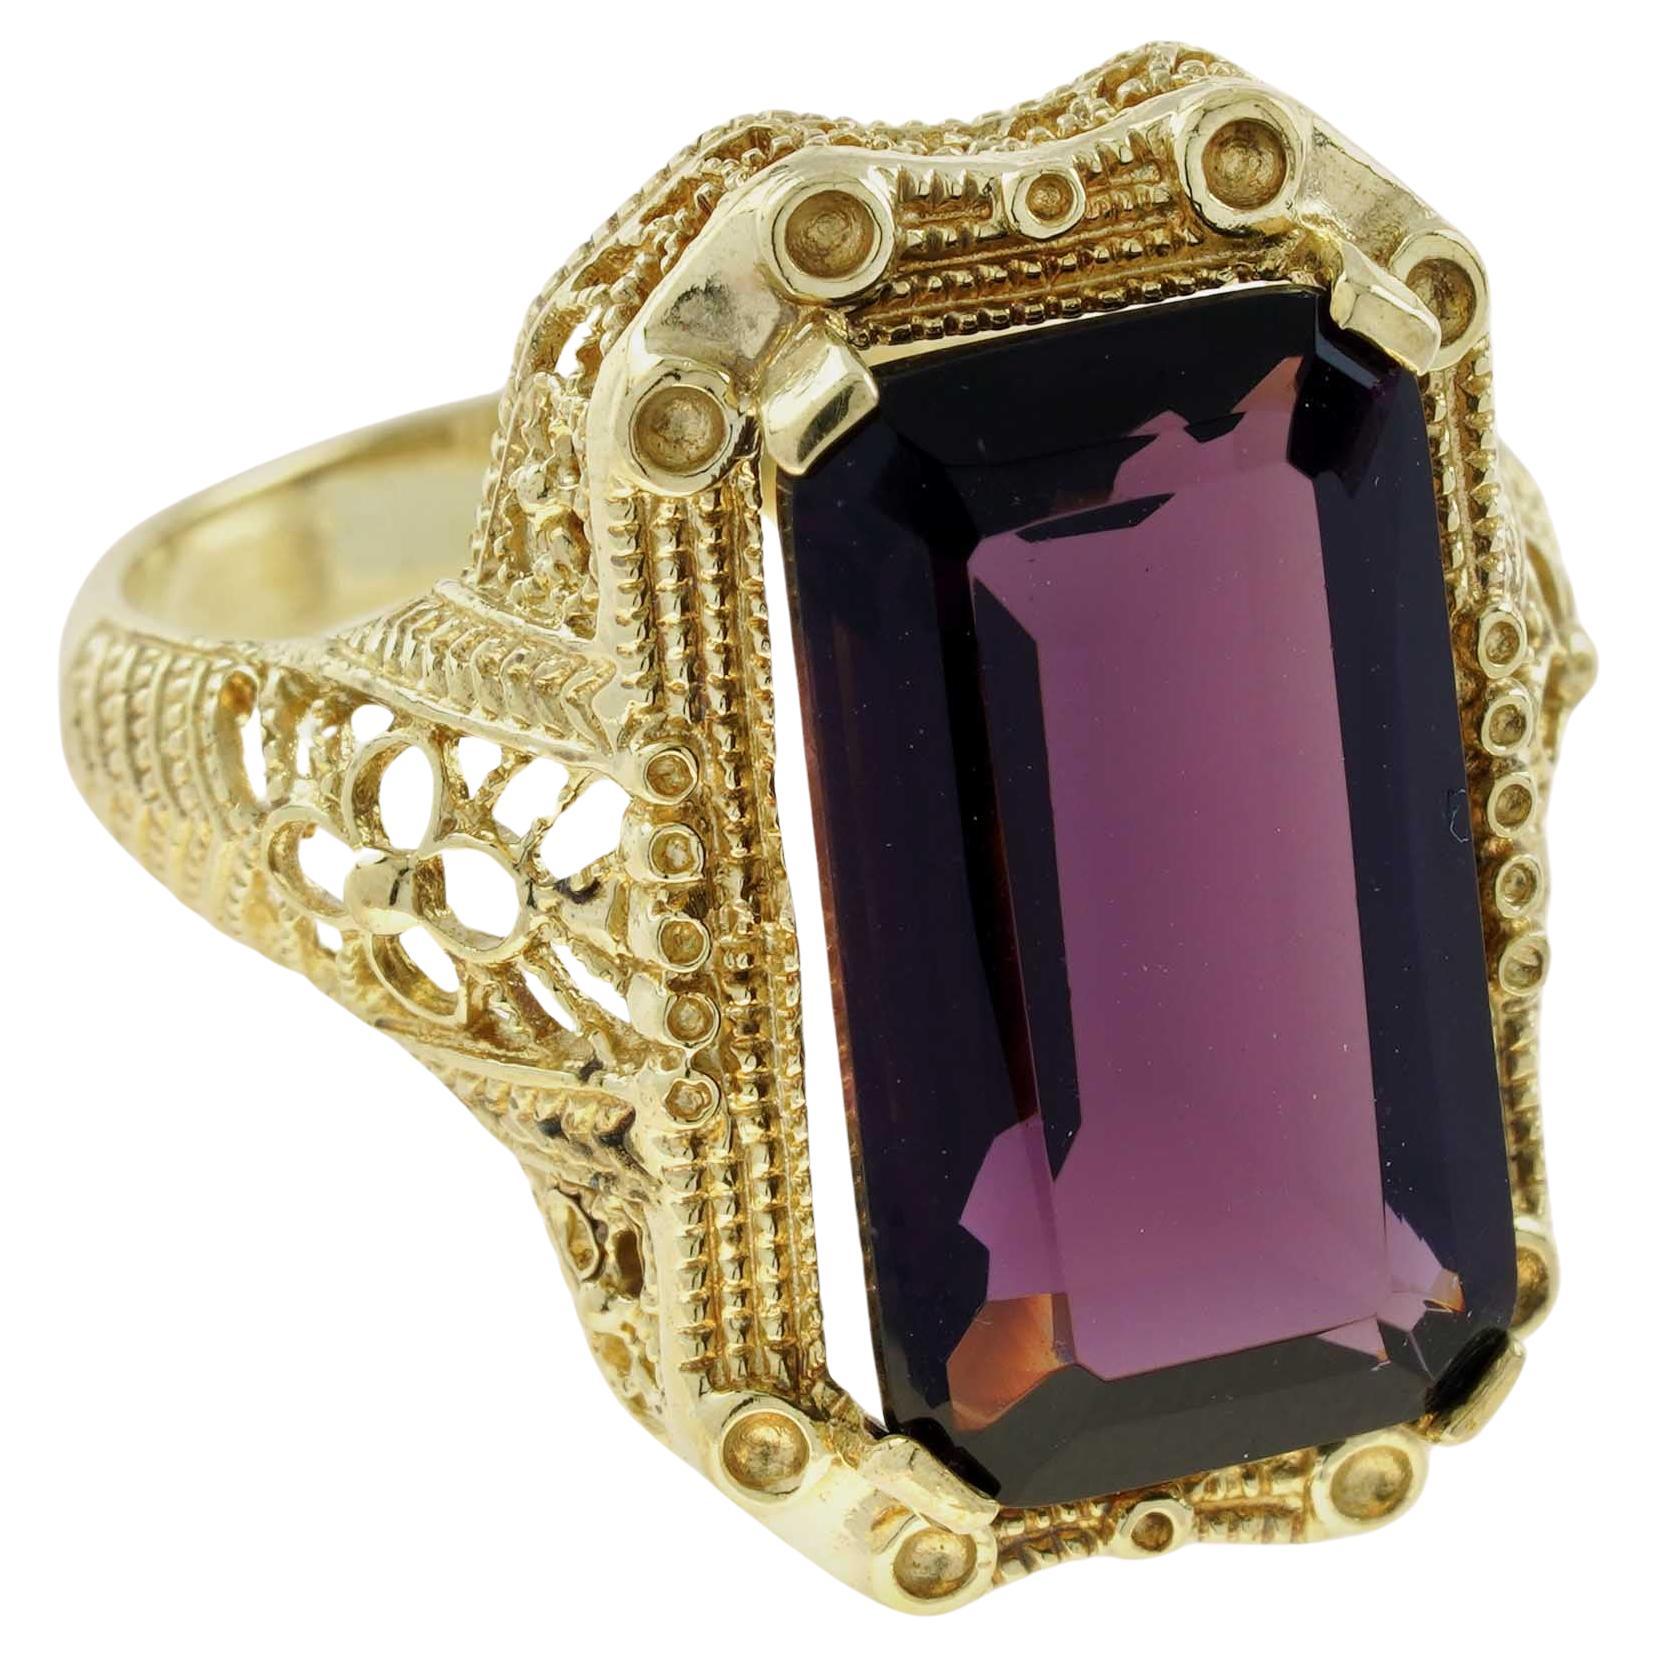 For Sale:  Natural 9 Ct. Emerald Cut Amethyst Vintage Style Filigree Ring in Solid 9K Yello